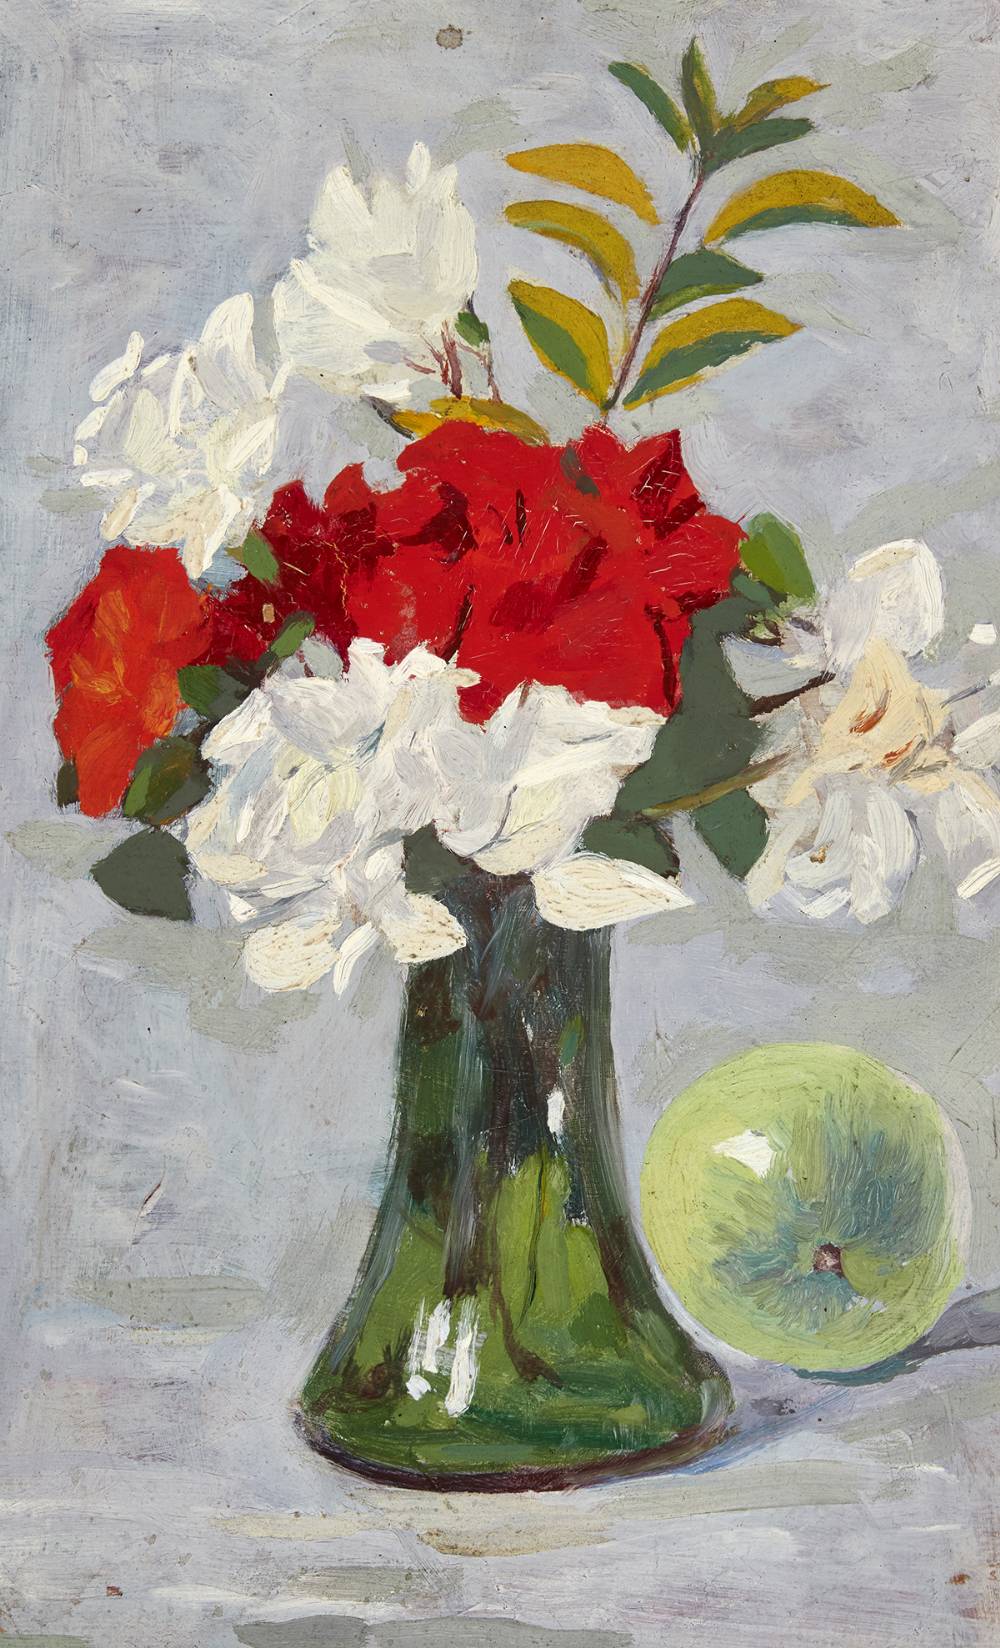 ORANGE AND WHITE FLOWERS IN A GREEN, BELL-BOTTOMED VASE by Michael Healy (1873-1941) at Whyte's Auctions